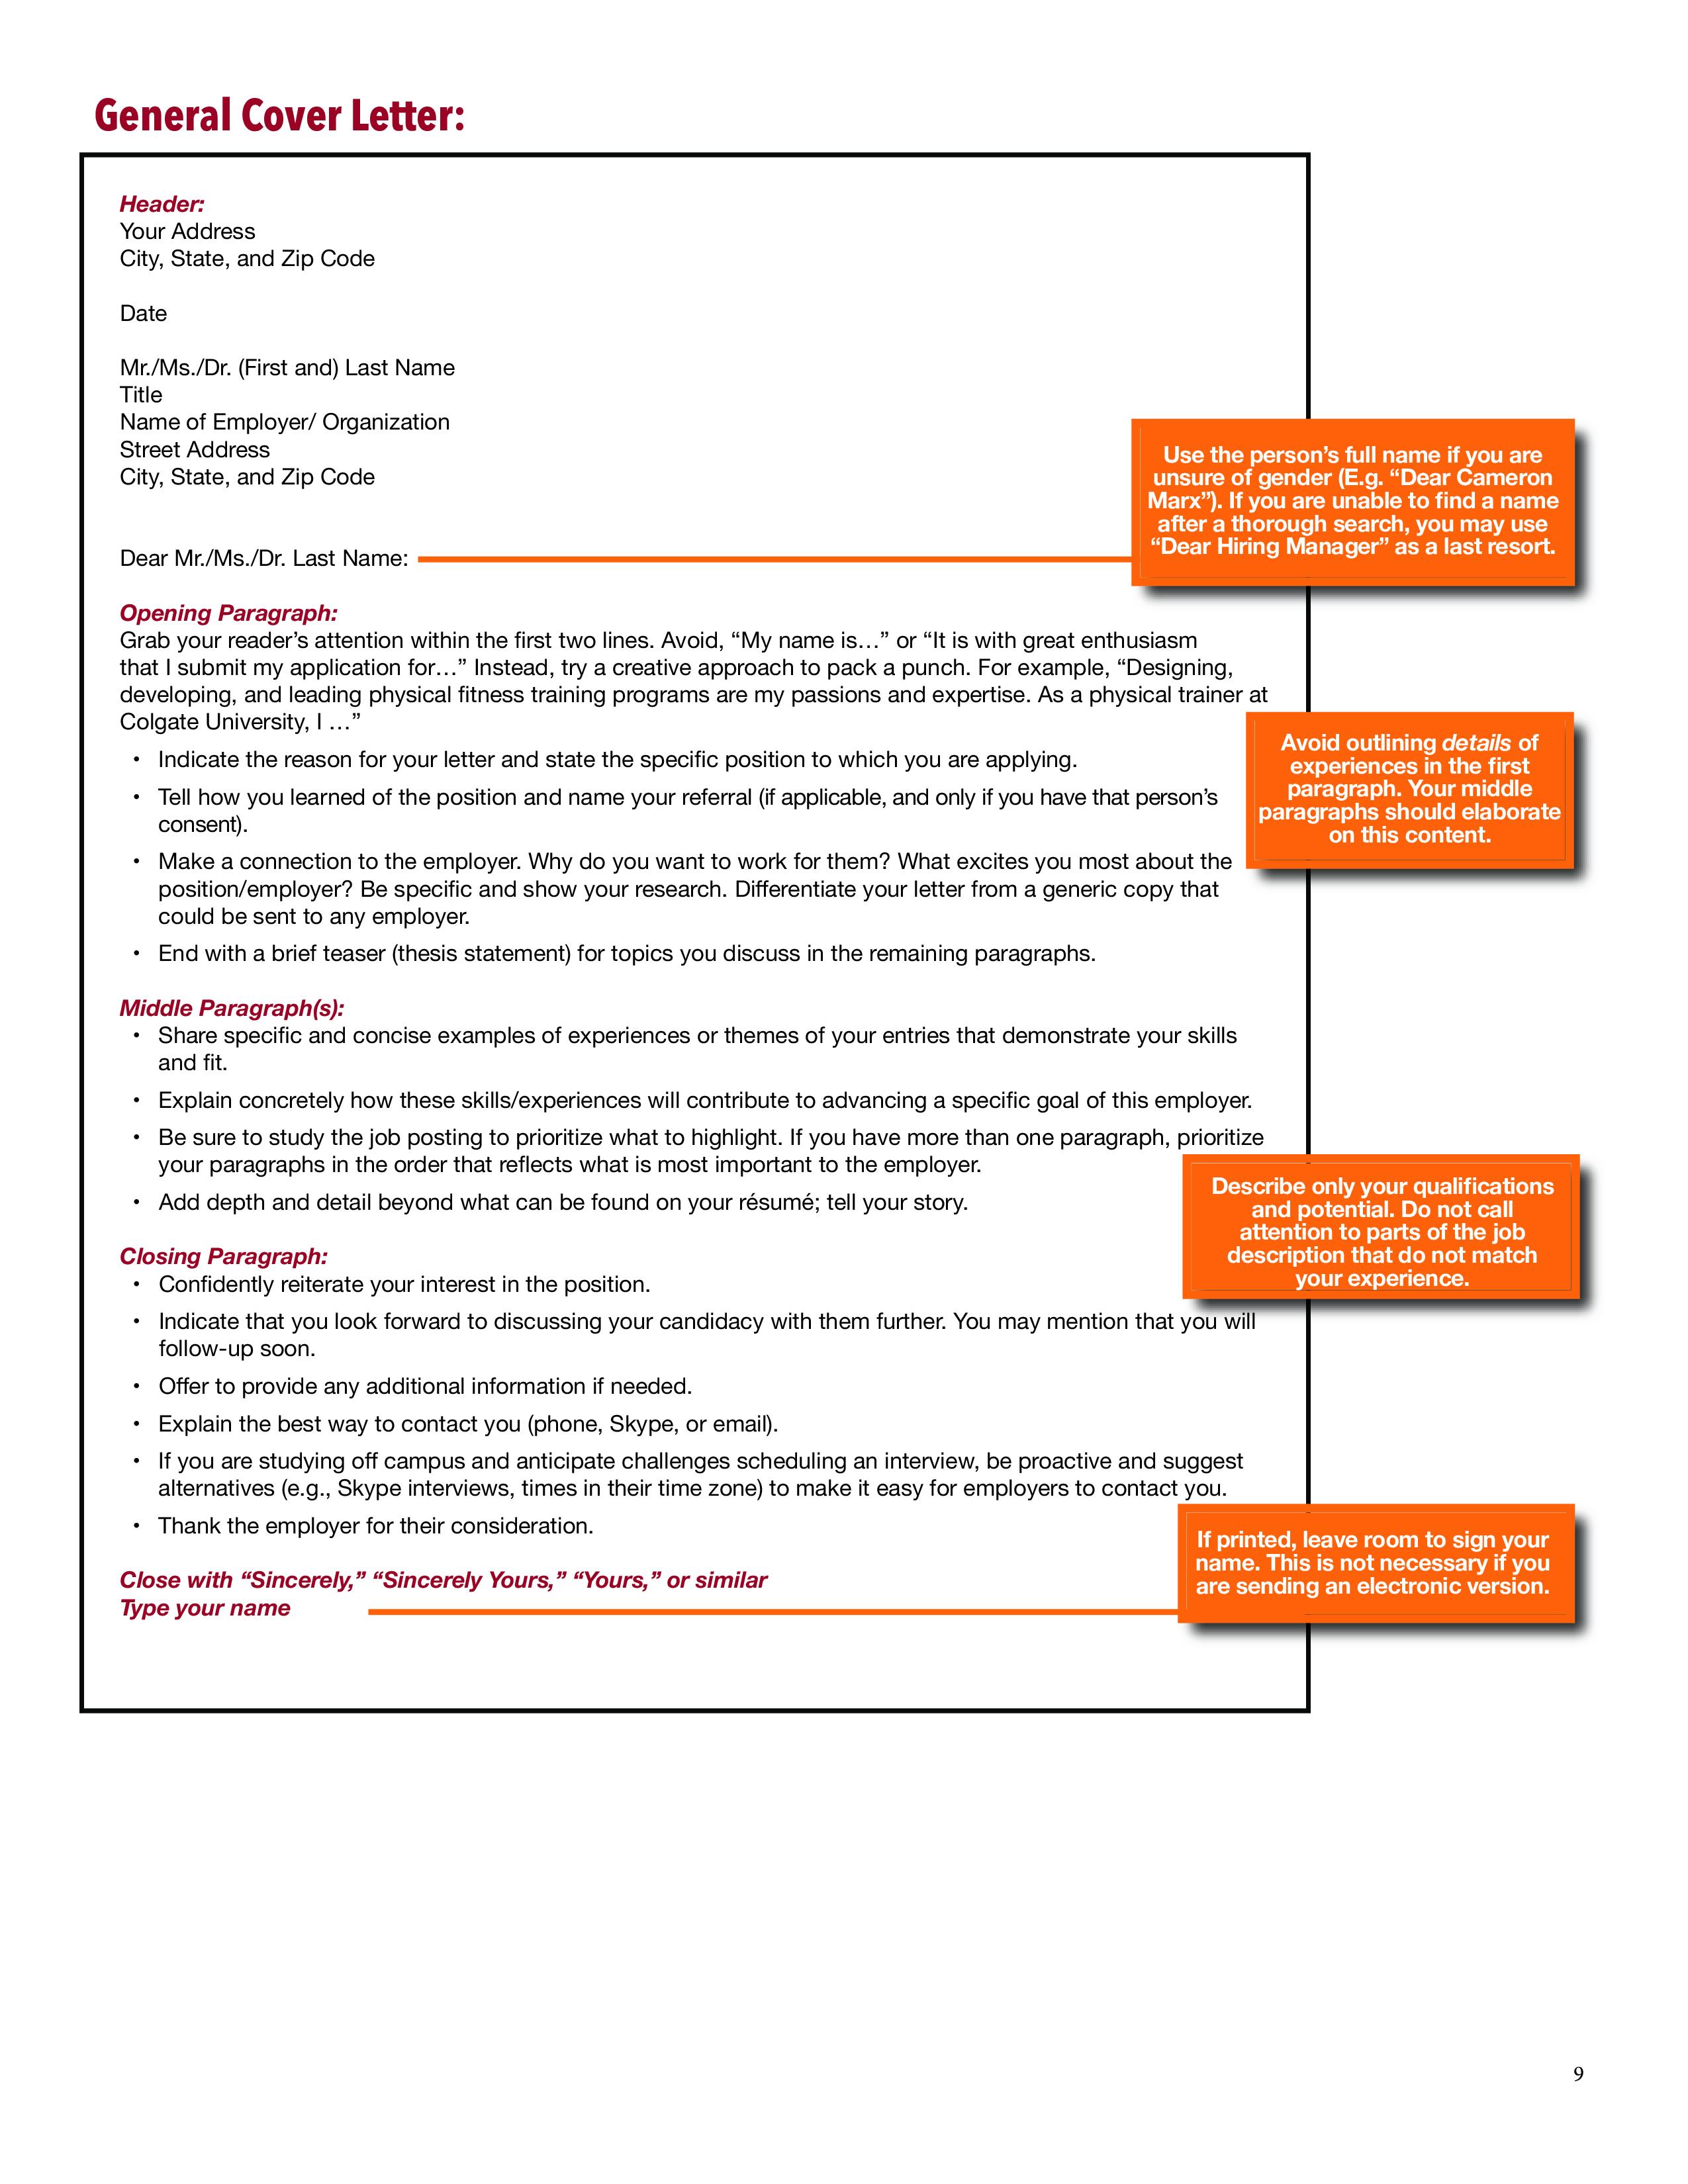 CV and Application Cover Letter templates main image